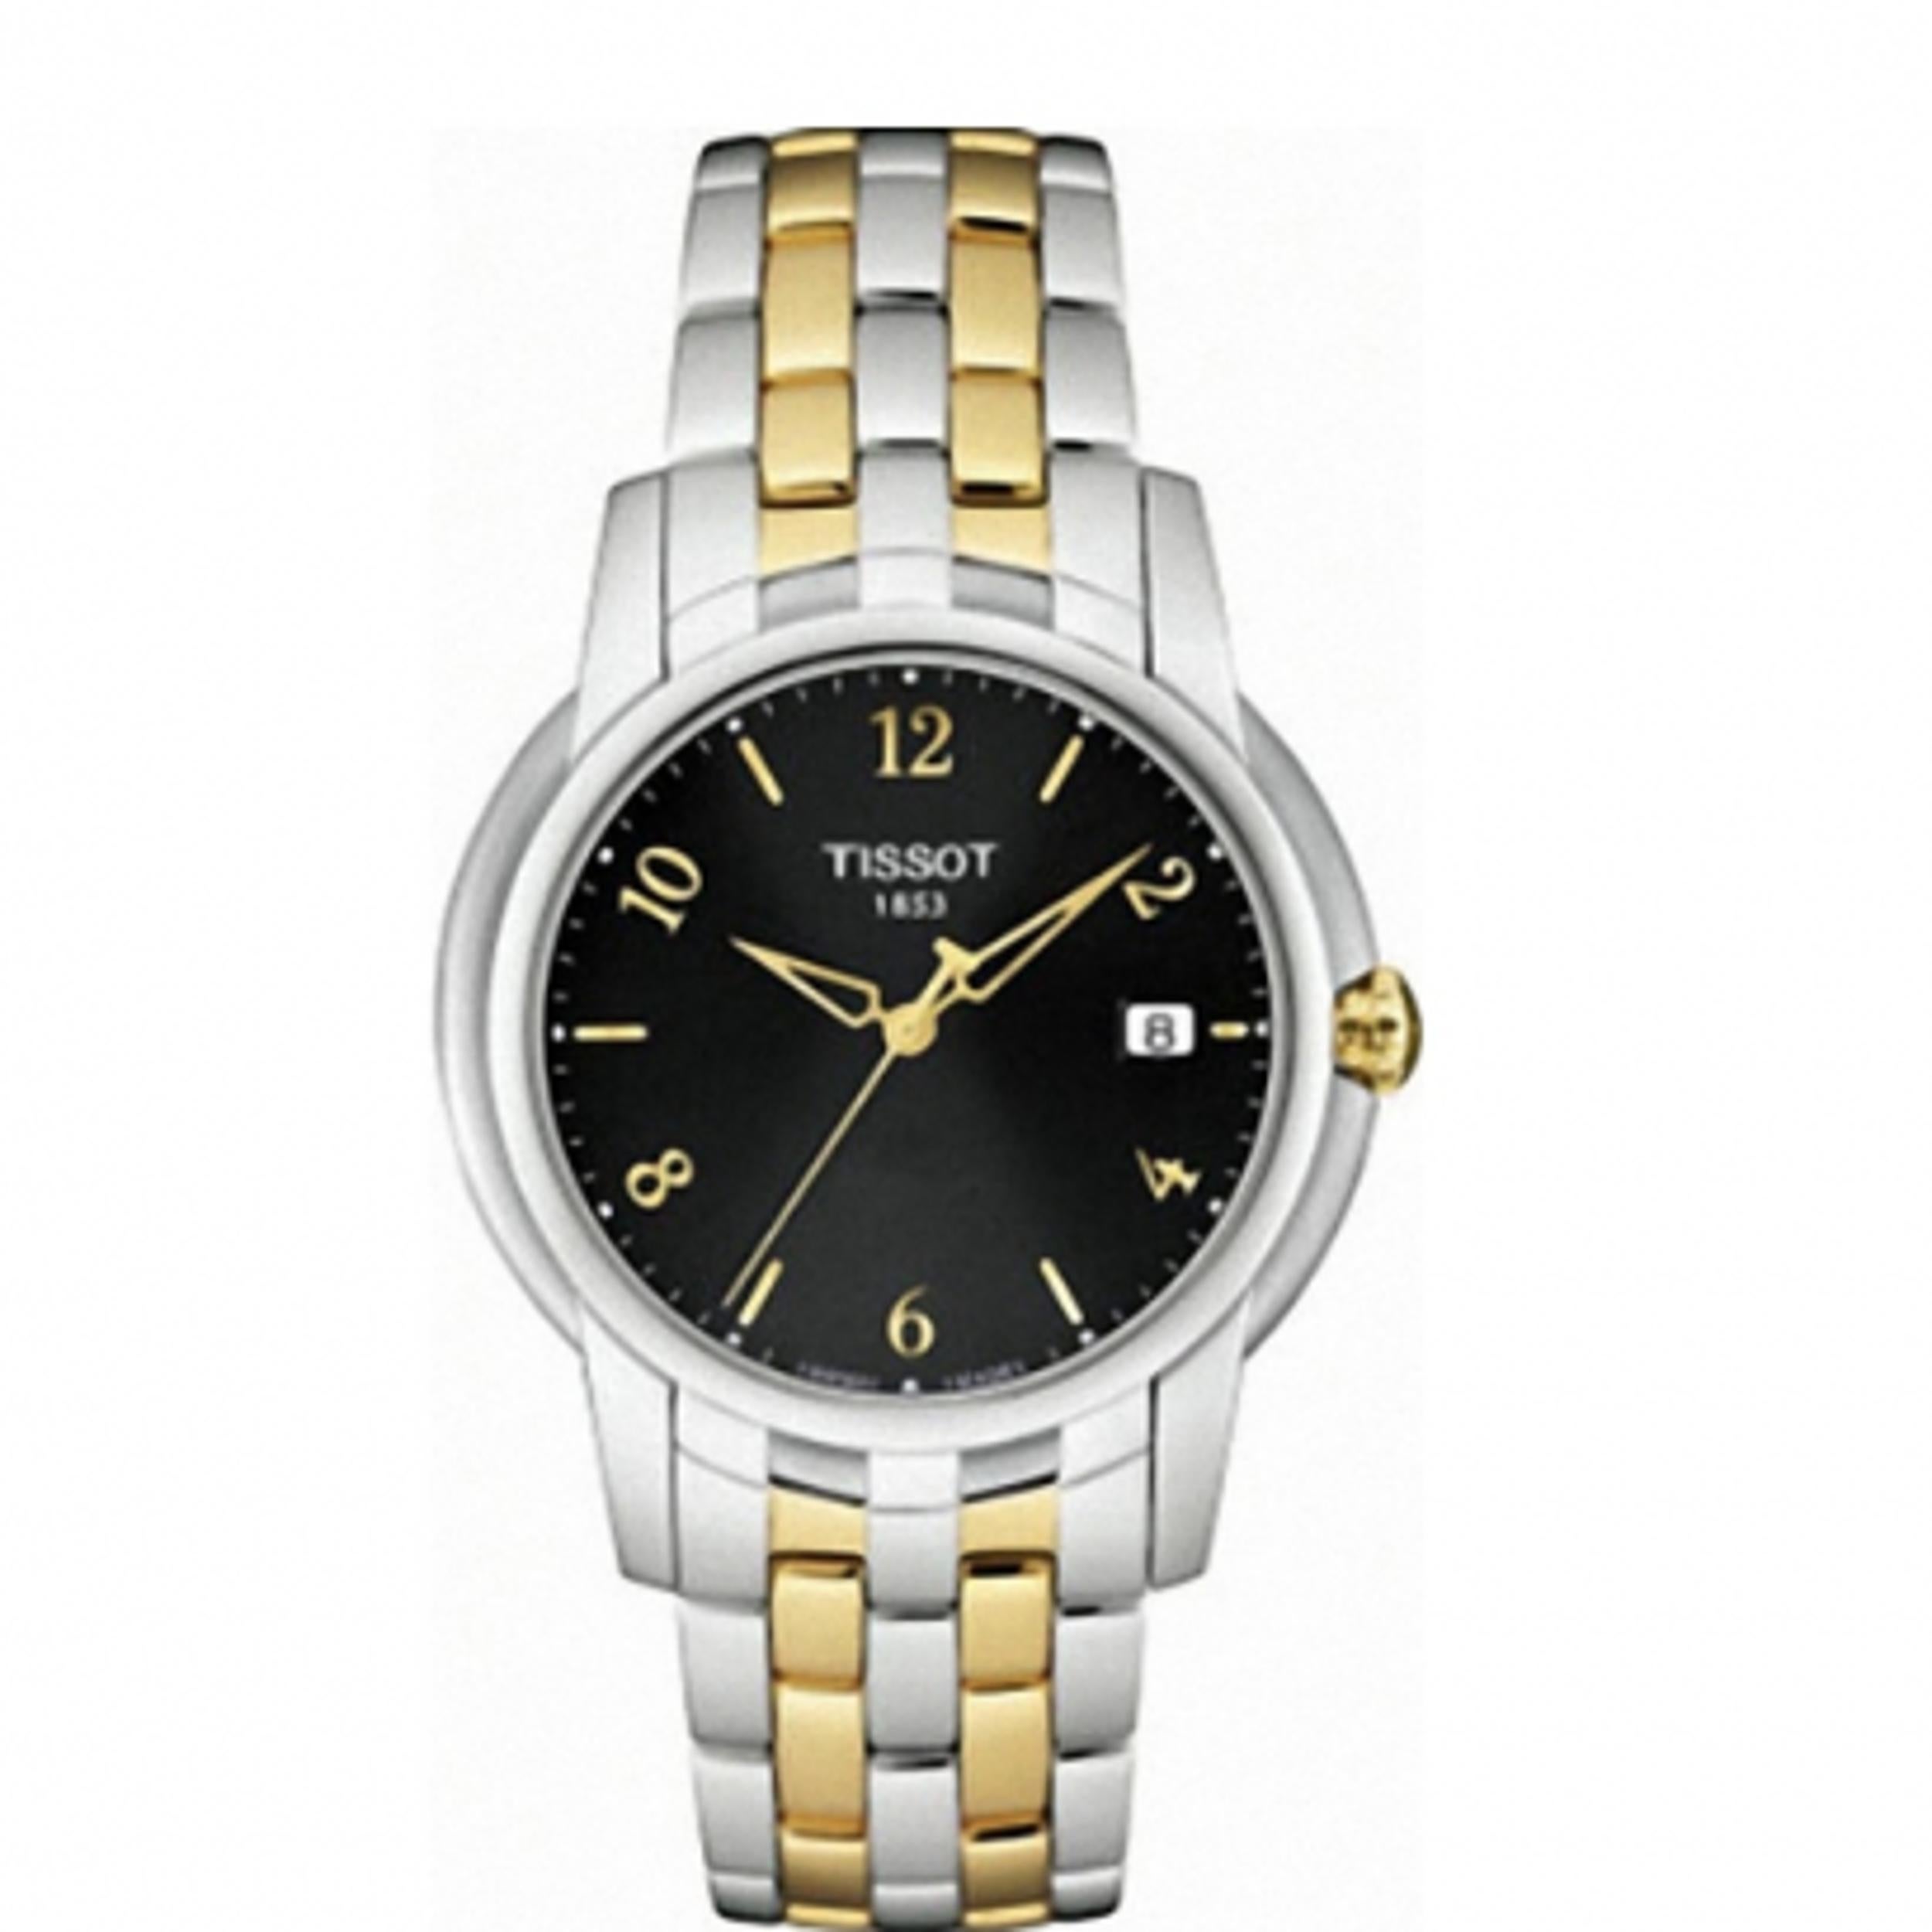 This display model Tissot Ballade T97.2.481.52 is a beautiful men's timepiece that is powered by quartz (battery) movement which is cased in a stainless steel case. It has a round shape face,  dial and has hand arabic numerals style markers. It is